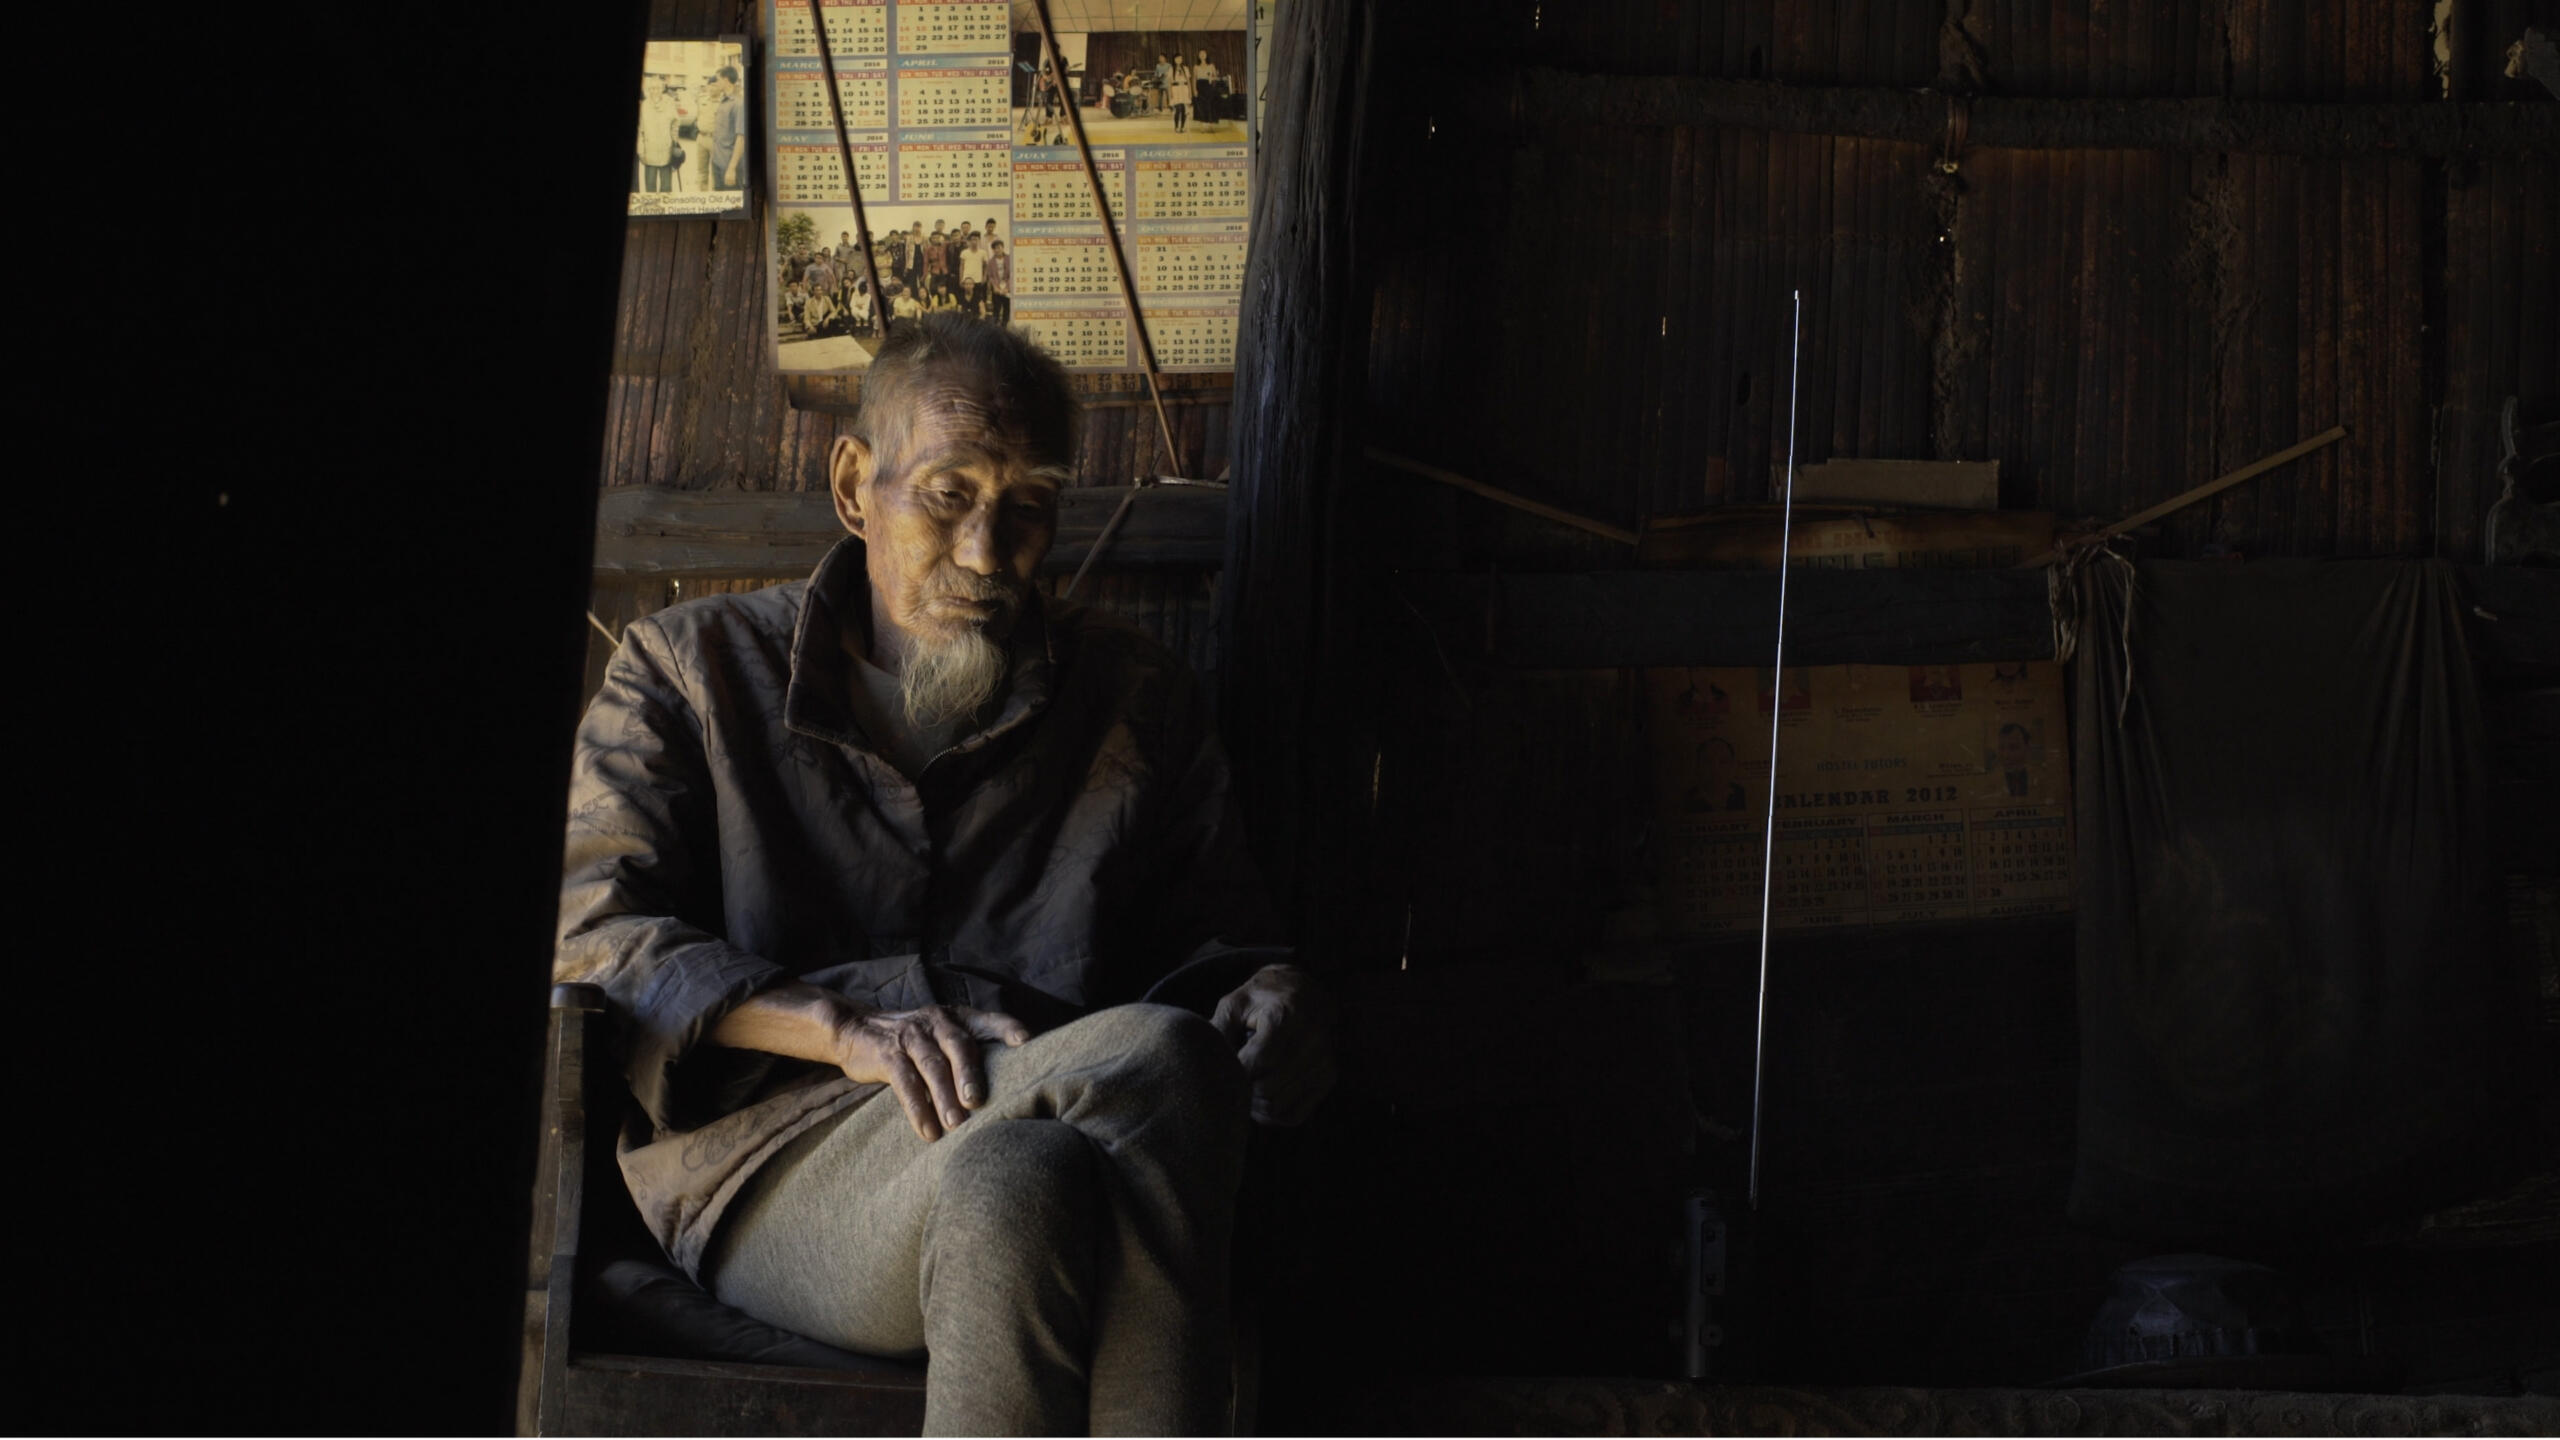 An old man sits in a dark room, wrapped in a blanket and covered in dirt.